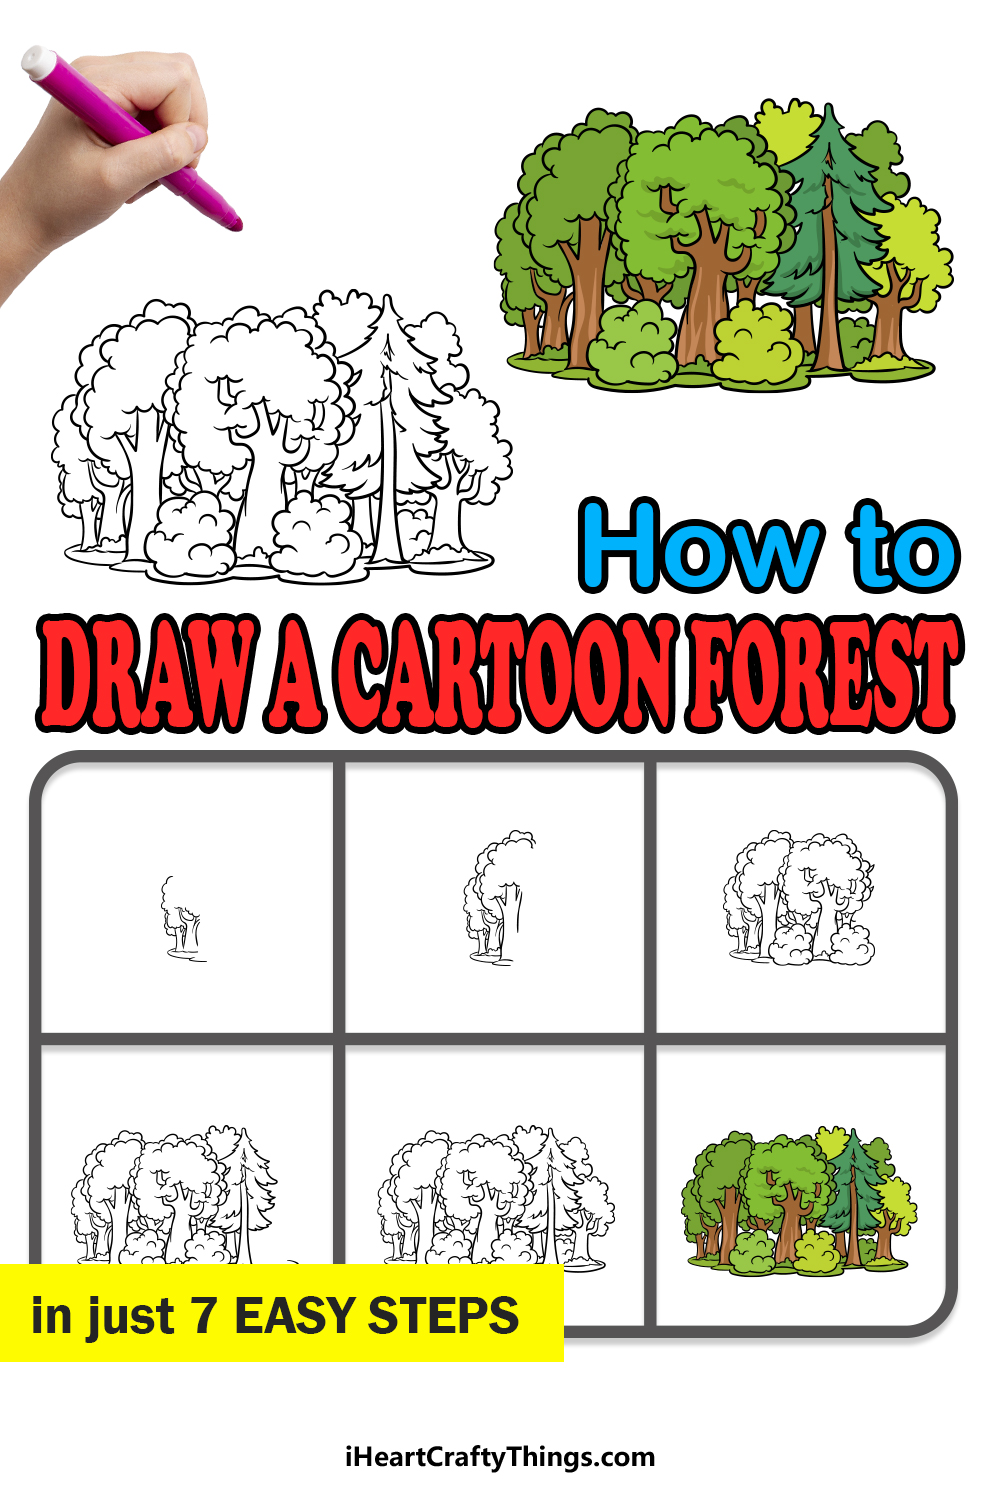 how to draw a cartoon forest in 7 easy steps